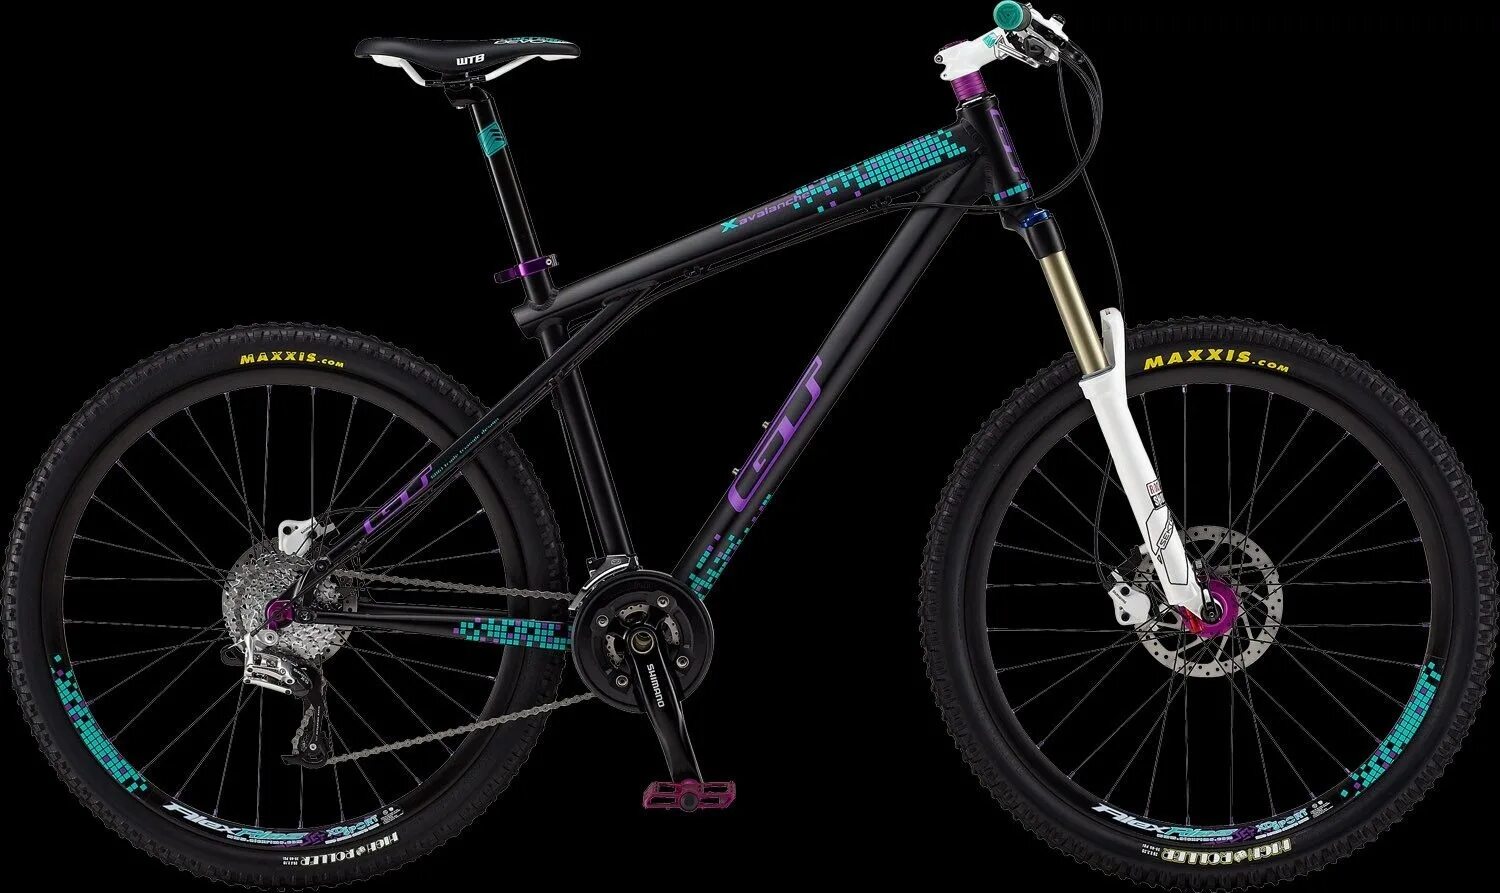 Метасирус х1. Gt Avalanche Expert 2011. Велосипед gt Avalanche Expert. Gt Aggressor Expert 2021. 2011 Gt Bicycles Avalanche 1.0.